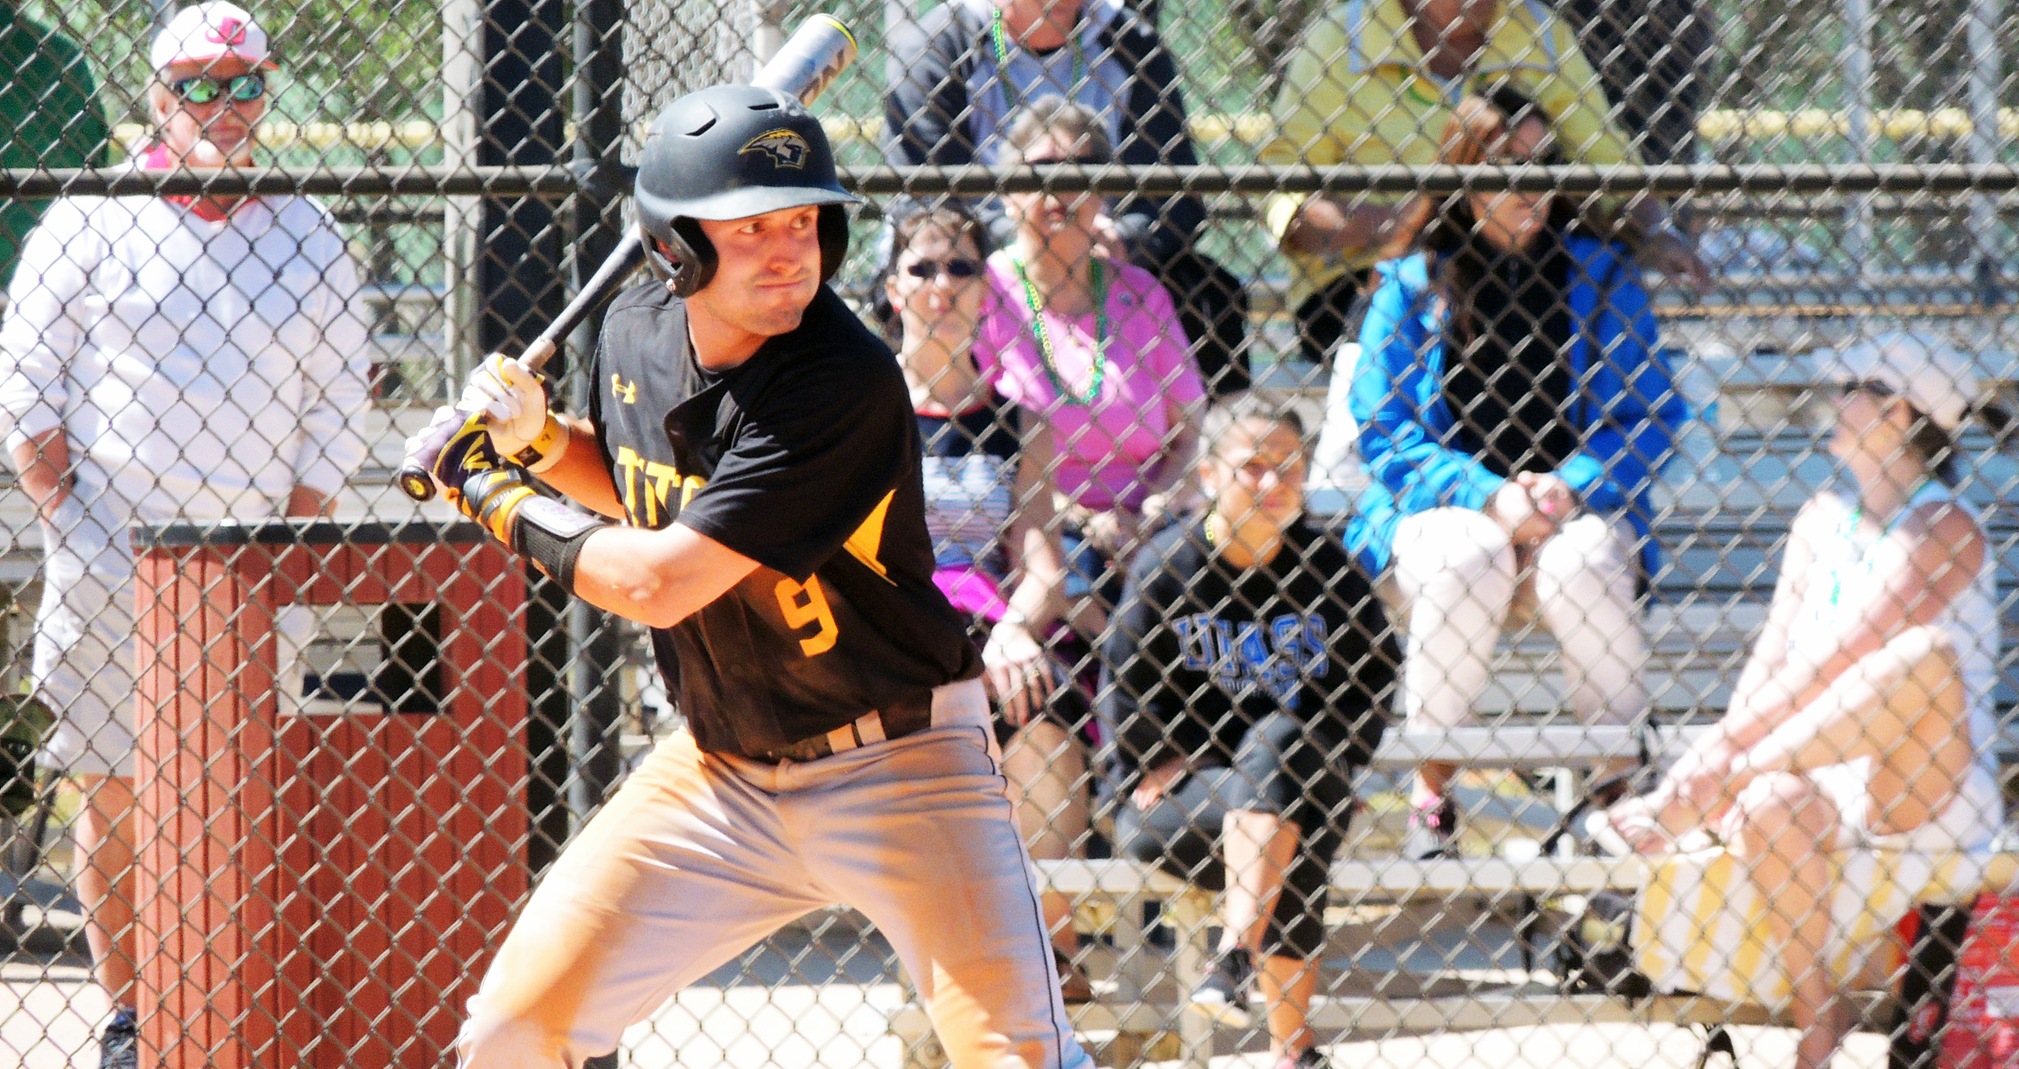 Tyler Kozlowski had three hits, including a game-tying home run, and two RBIs against the Beacons.